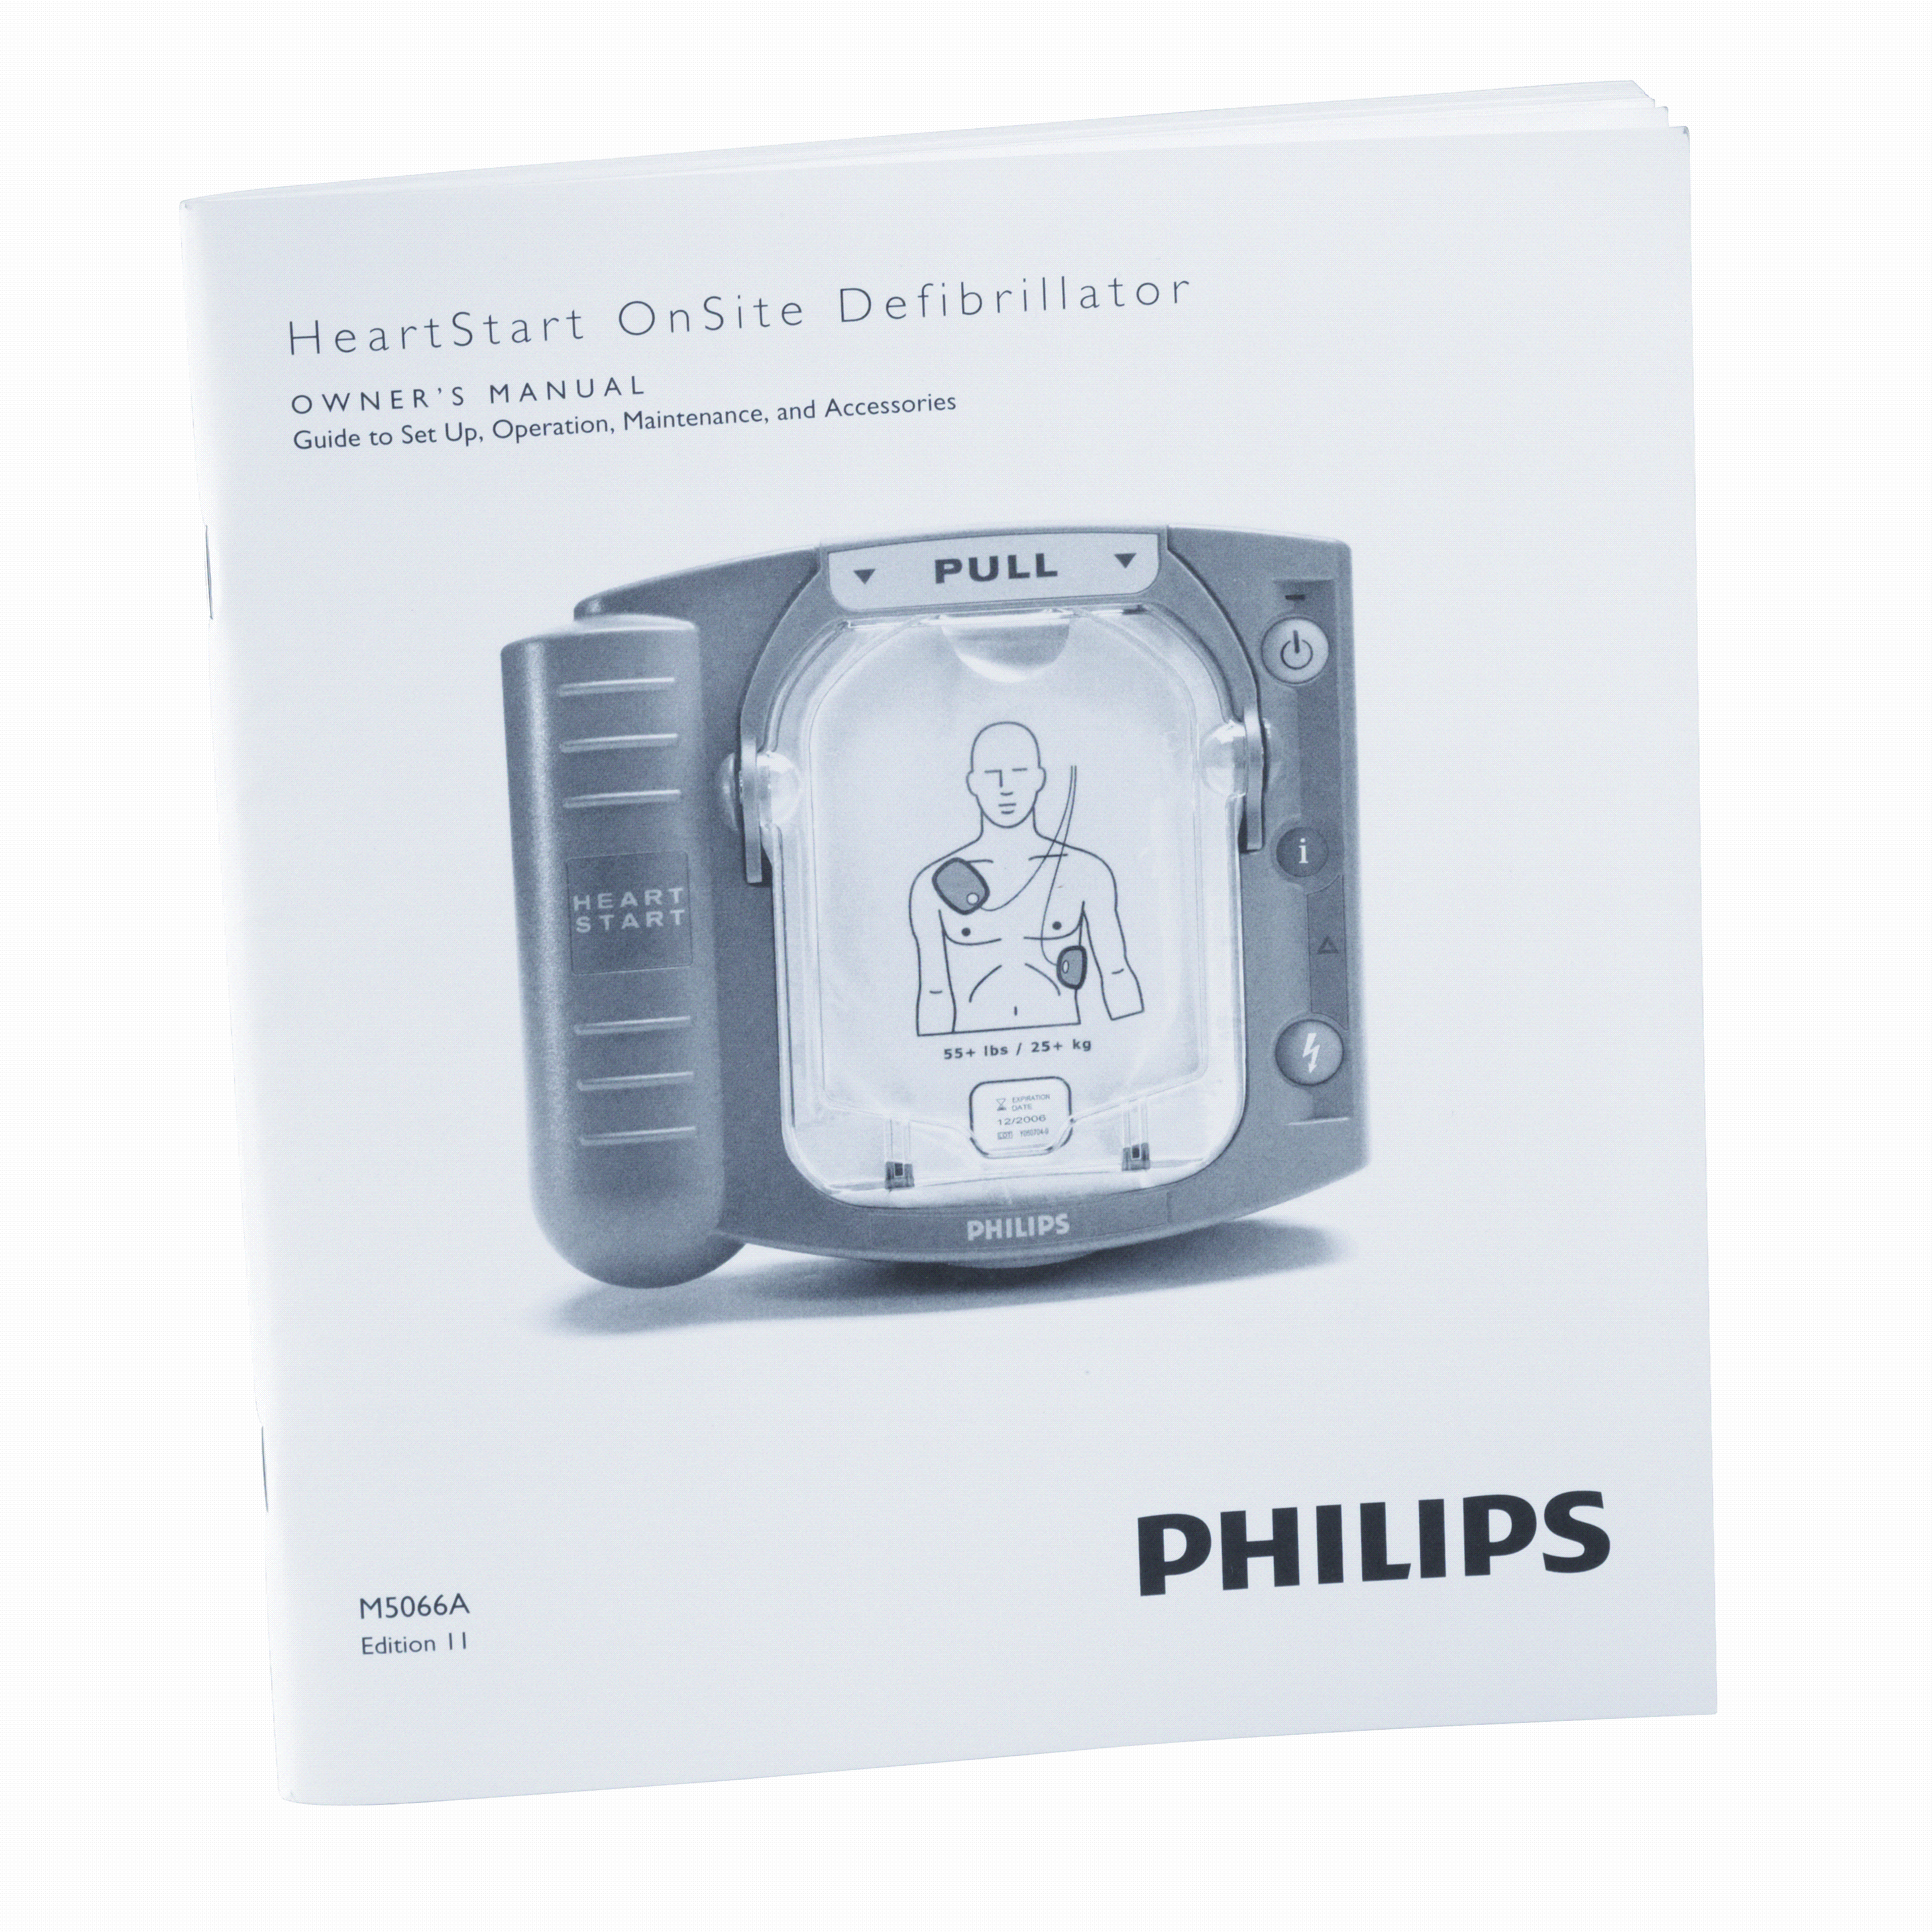 Philips Onsite AED with Standard Carrying Case image